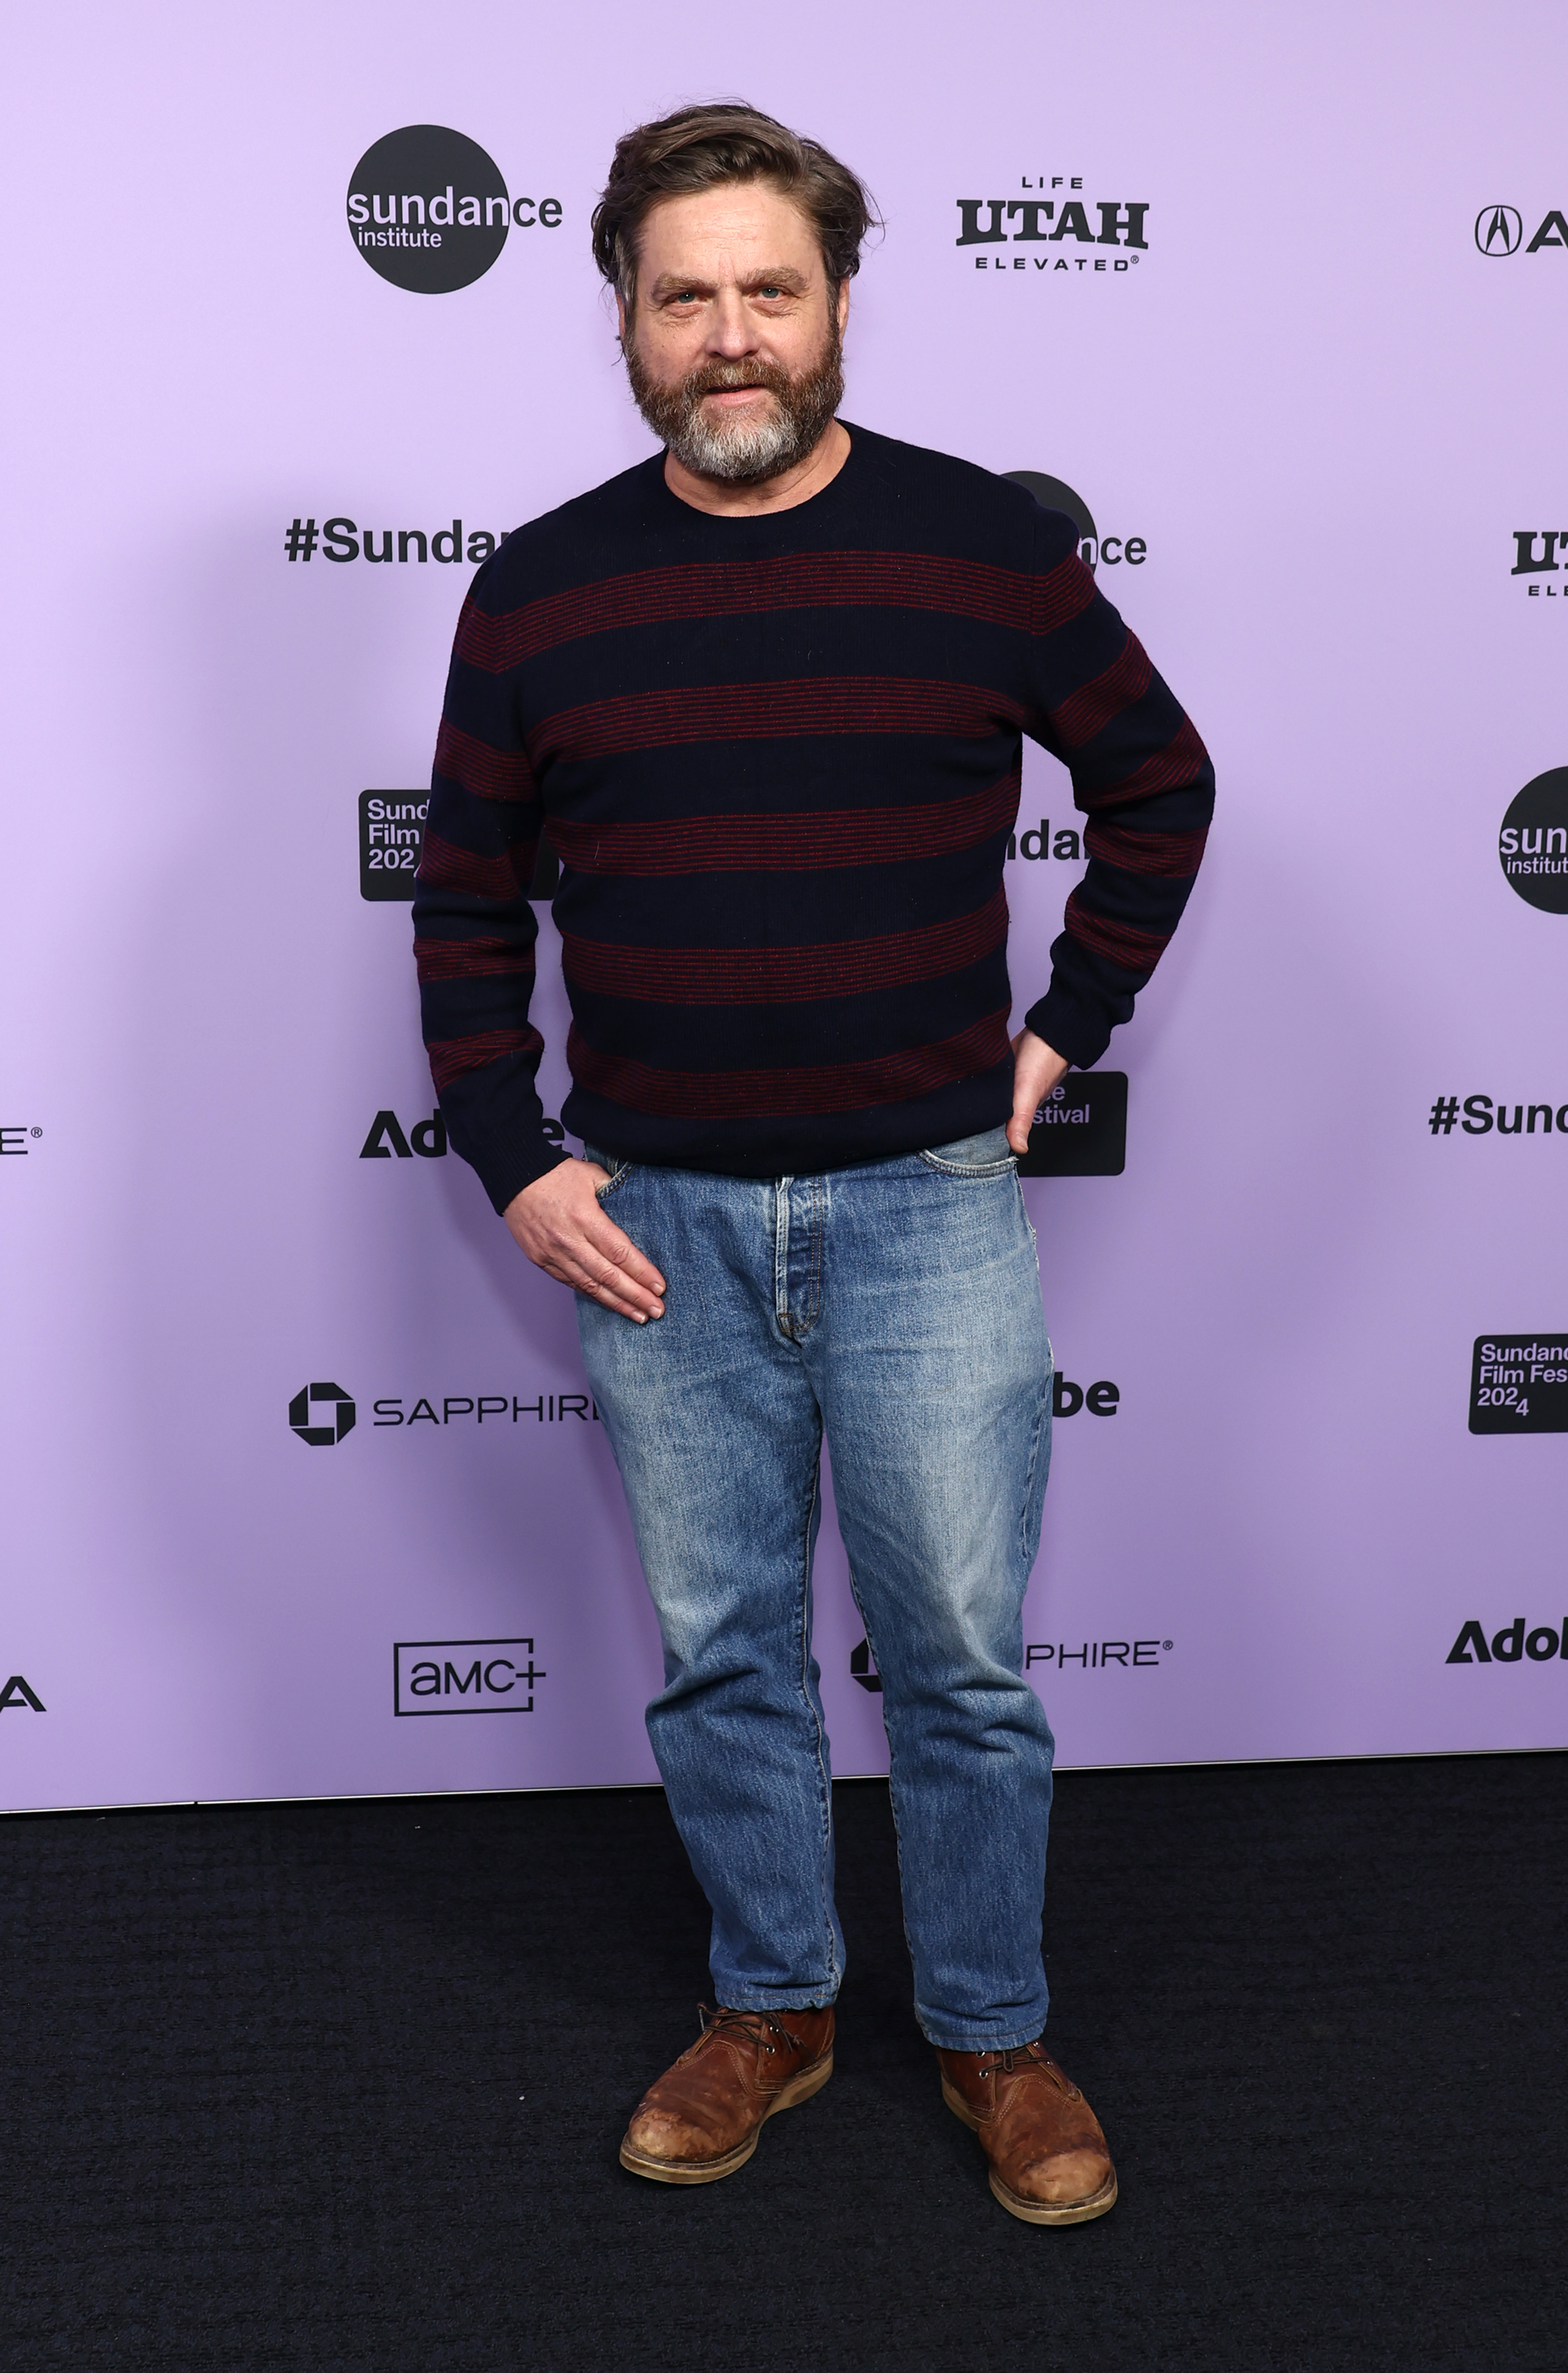 Zach Galifianakis attends the "Winner" premiere during the Sundance Film Festival at The Ray in Park City, Utah, on January 20, 2024. | Source: Getty Images